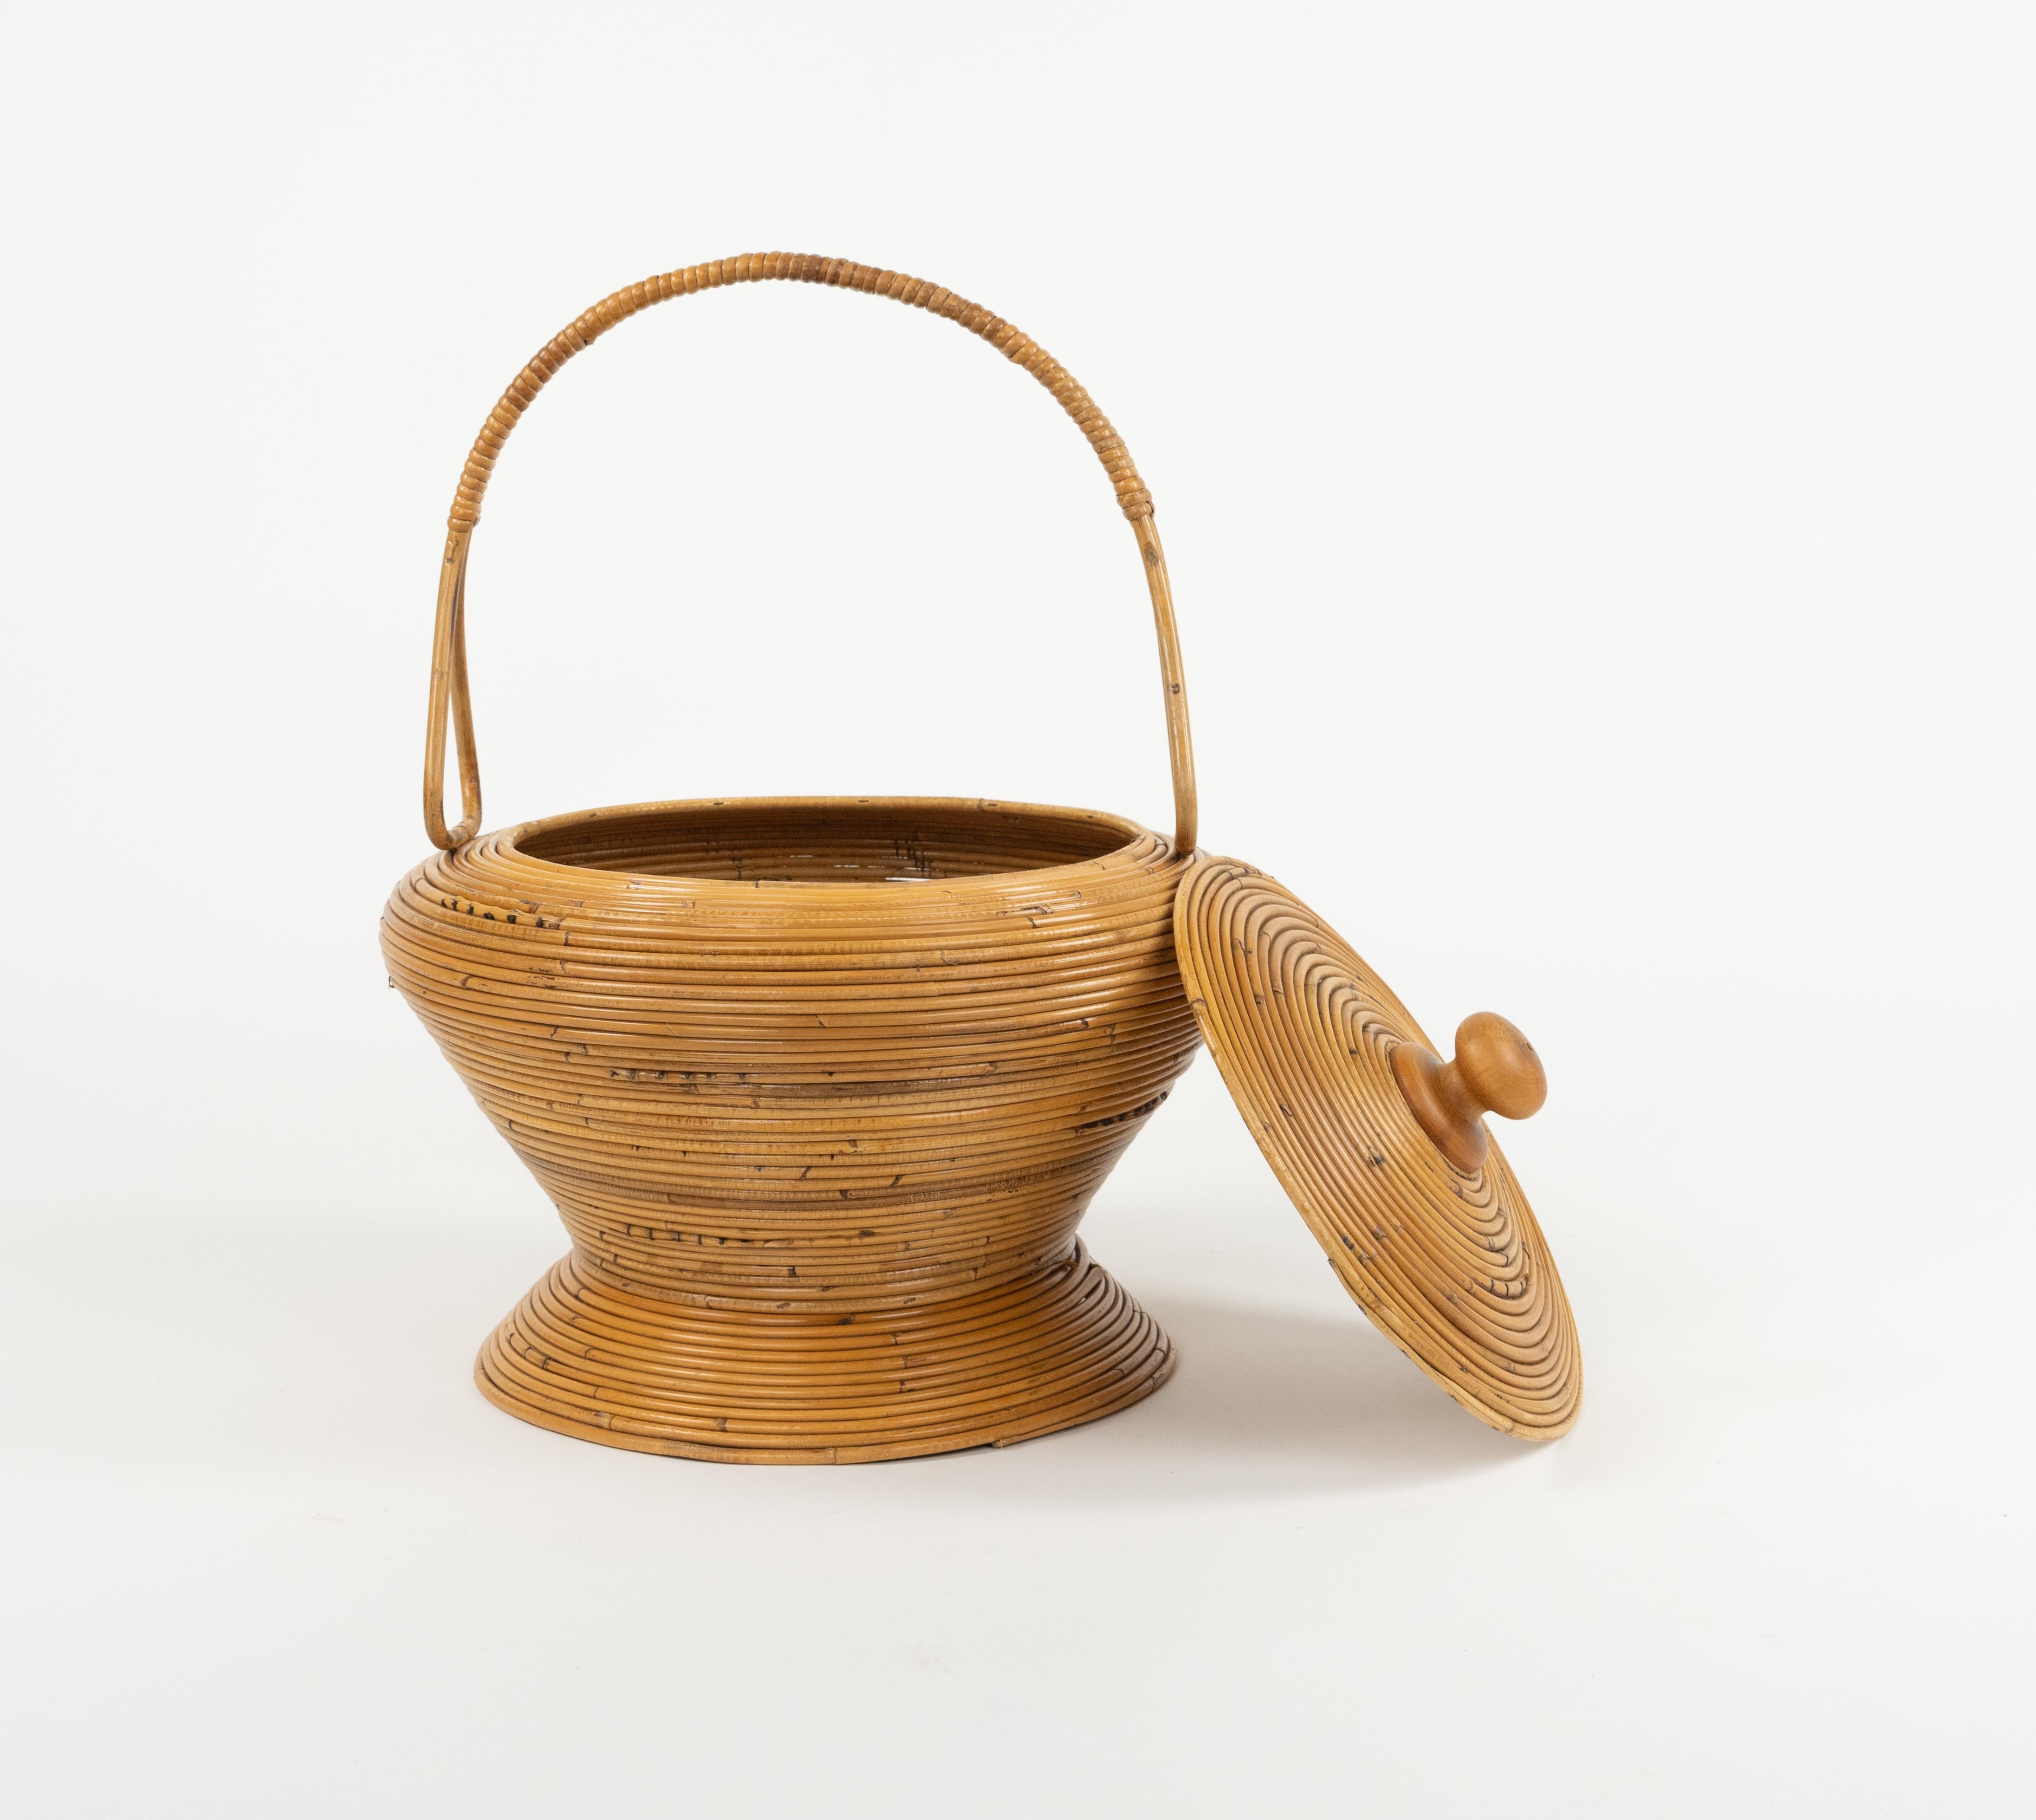 Midcentury Rattan Decorative Basket by Vivai Del Sud, Italy 1960s For Sale 1